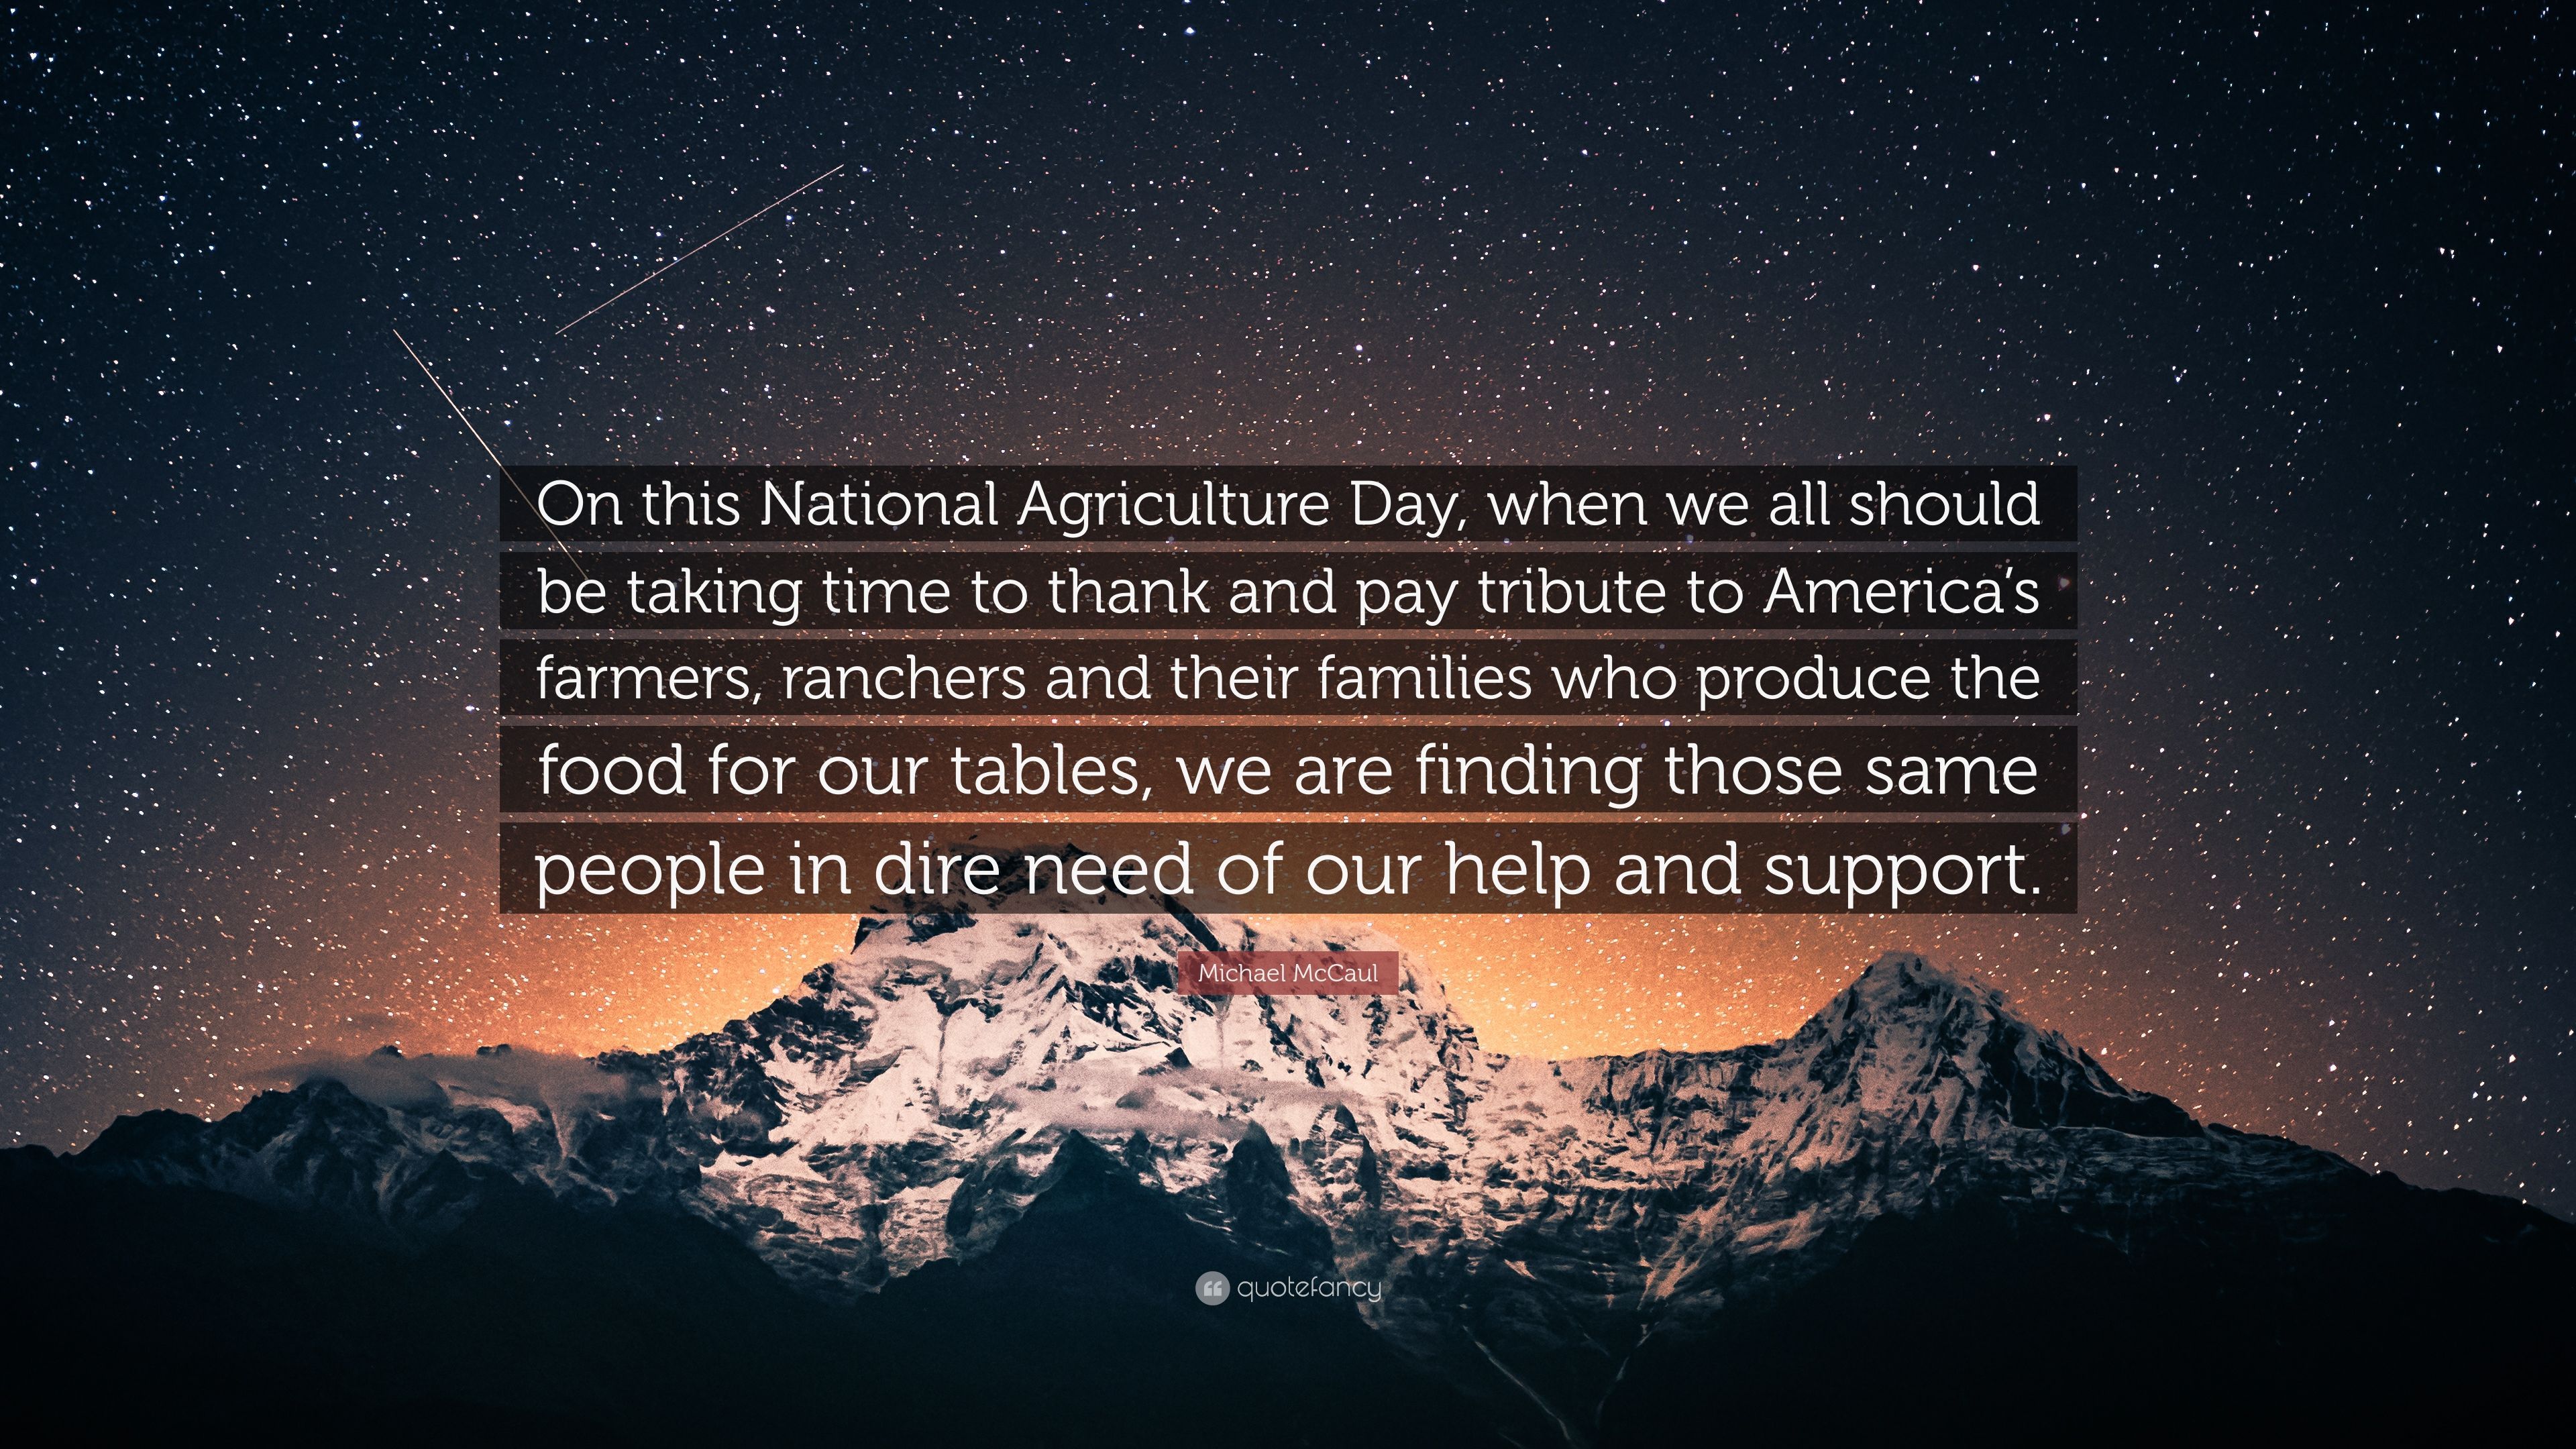 Michael McCaul Quote: “On this National Agriculture Day, when we all